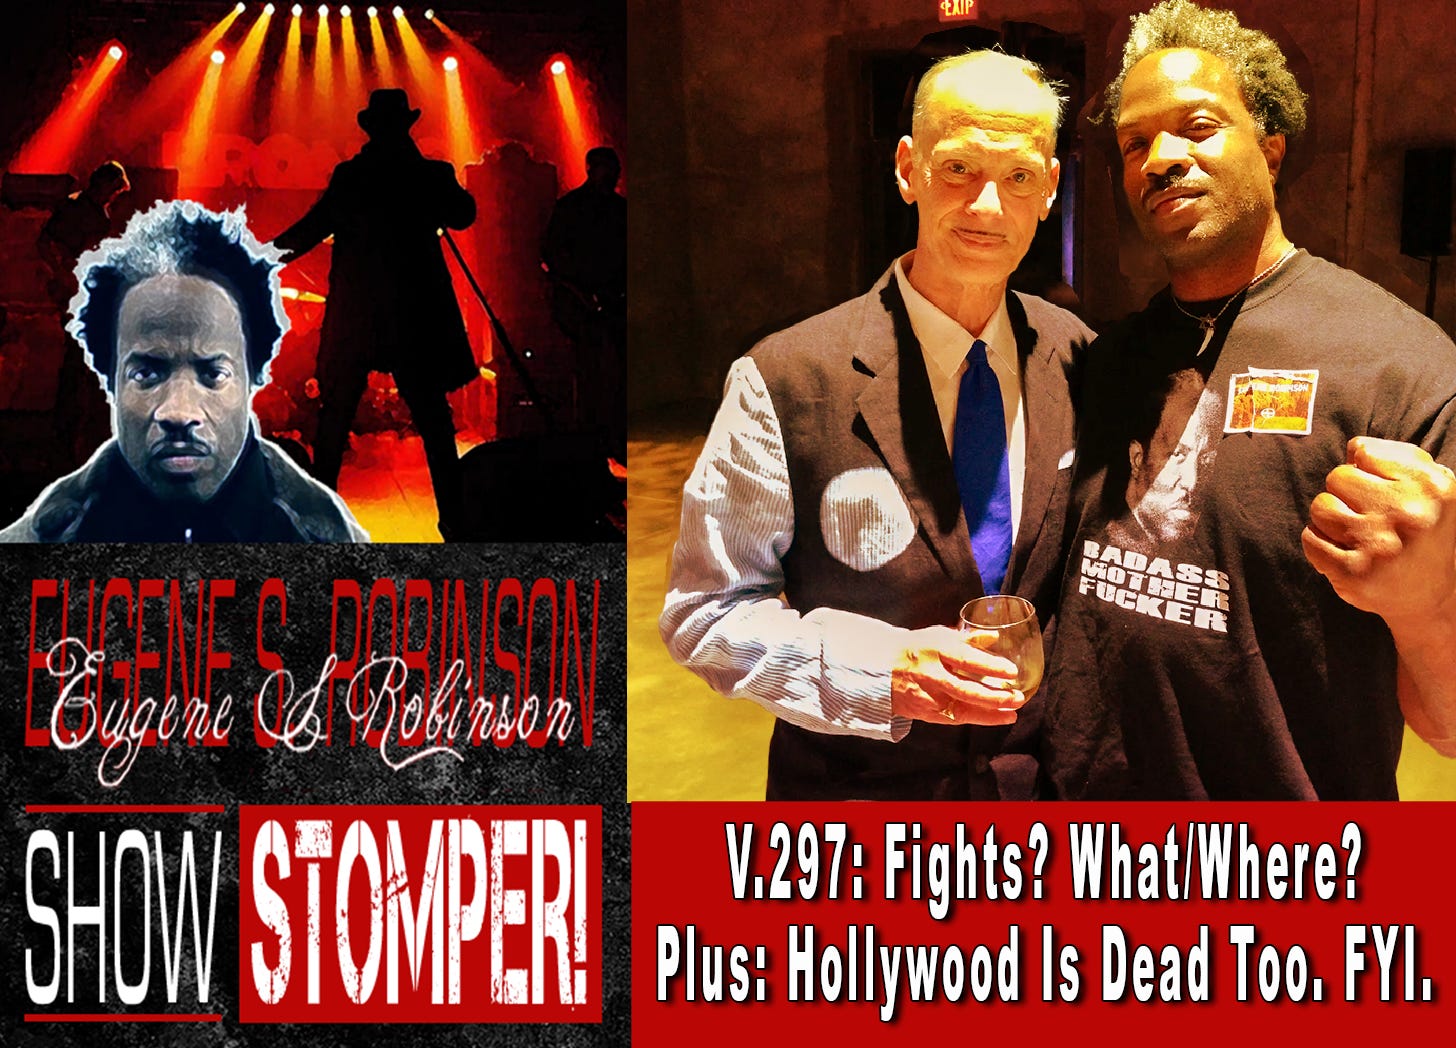 V.297: Fights? What/Where? Plus: Hollywood Is Dead Too. FYI. On The Eugene S. Robinson Show Stomper!